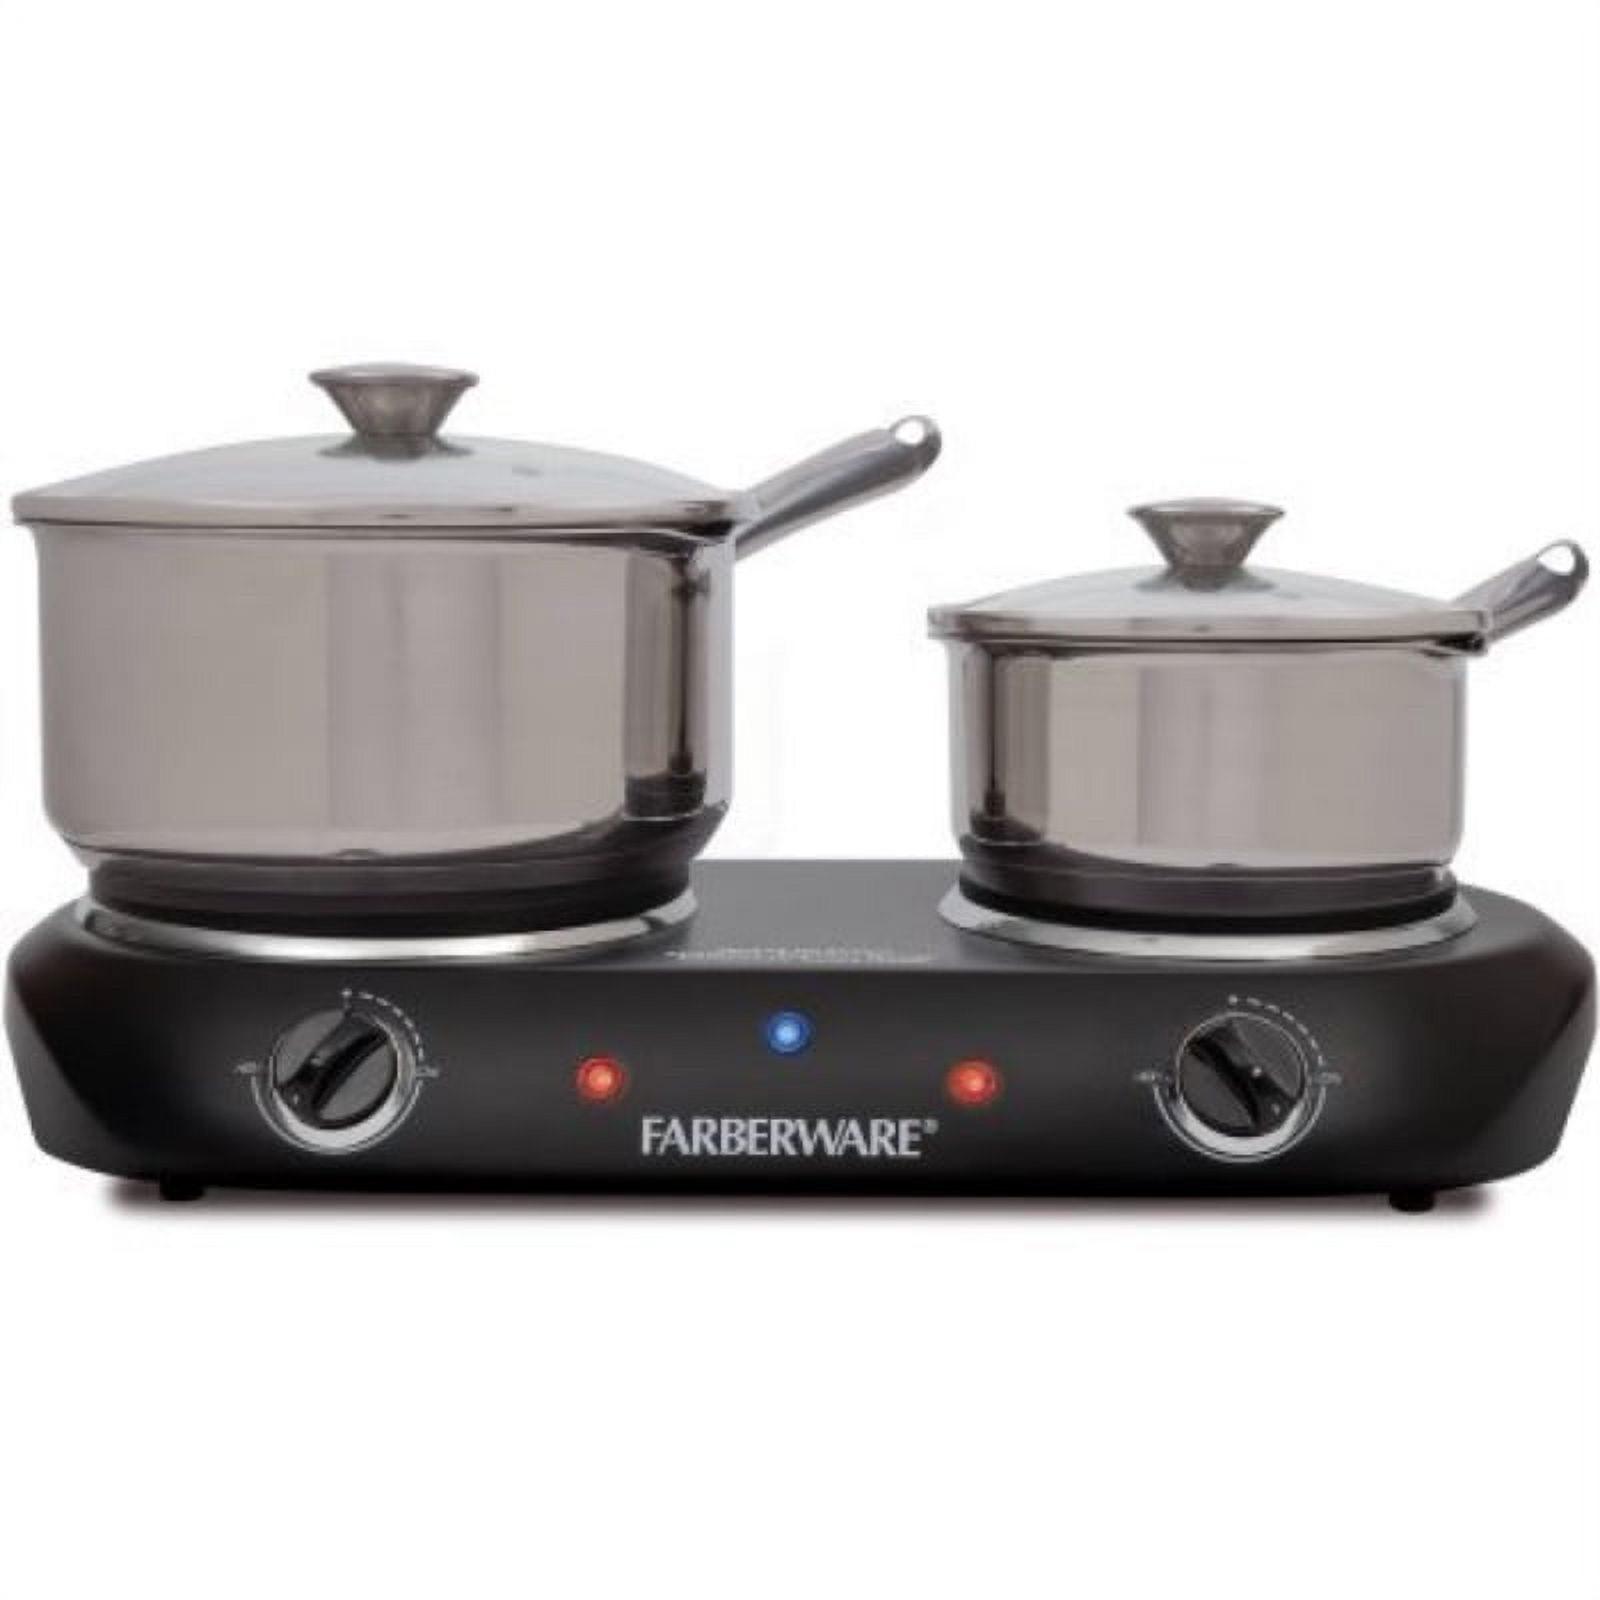 Farberware Double Burner with Solid Die-Cast Heating Plates - image 1 of 5